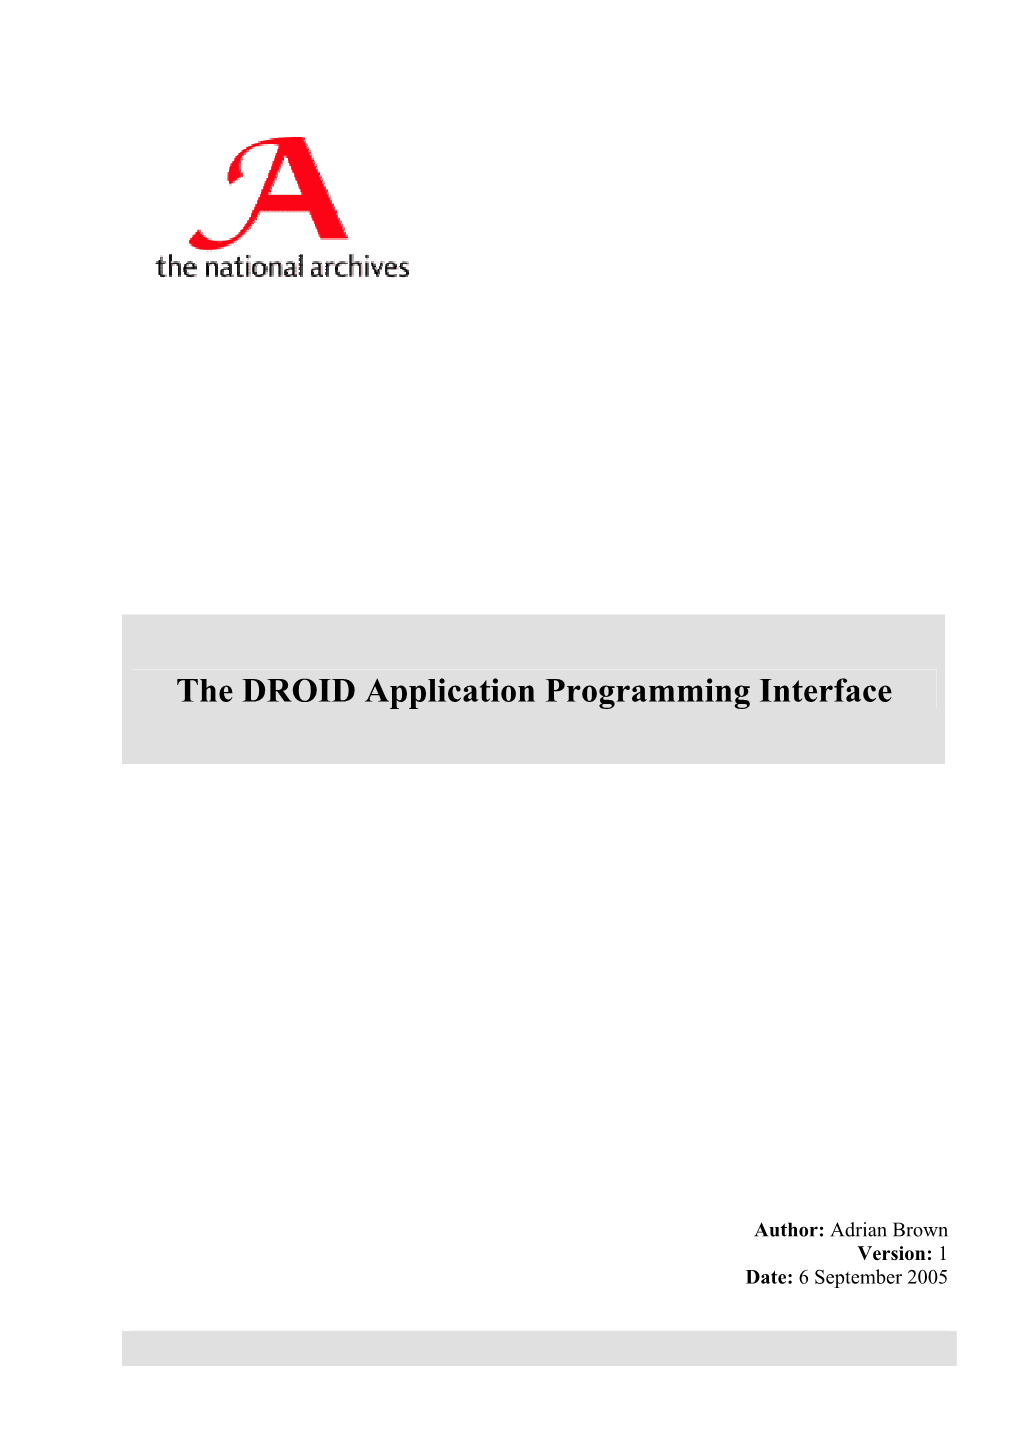 The DROID Application Programming Interface